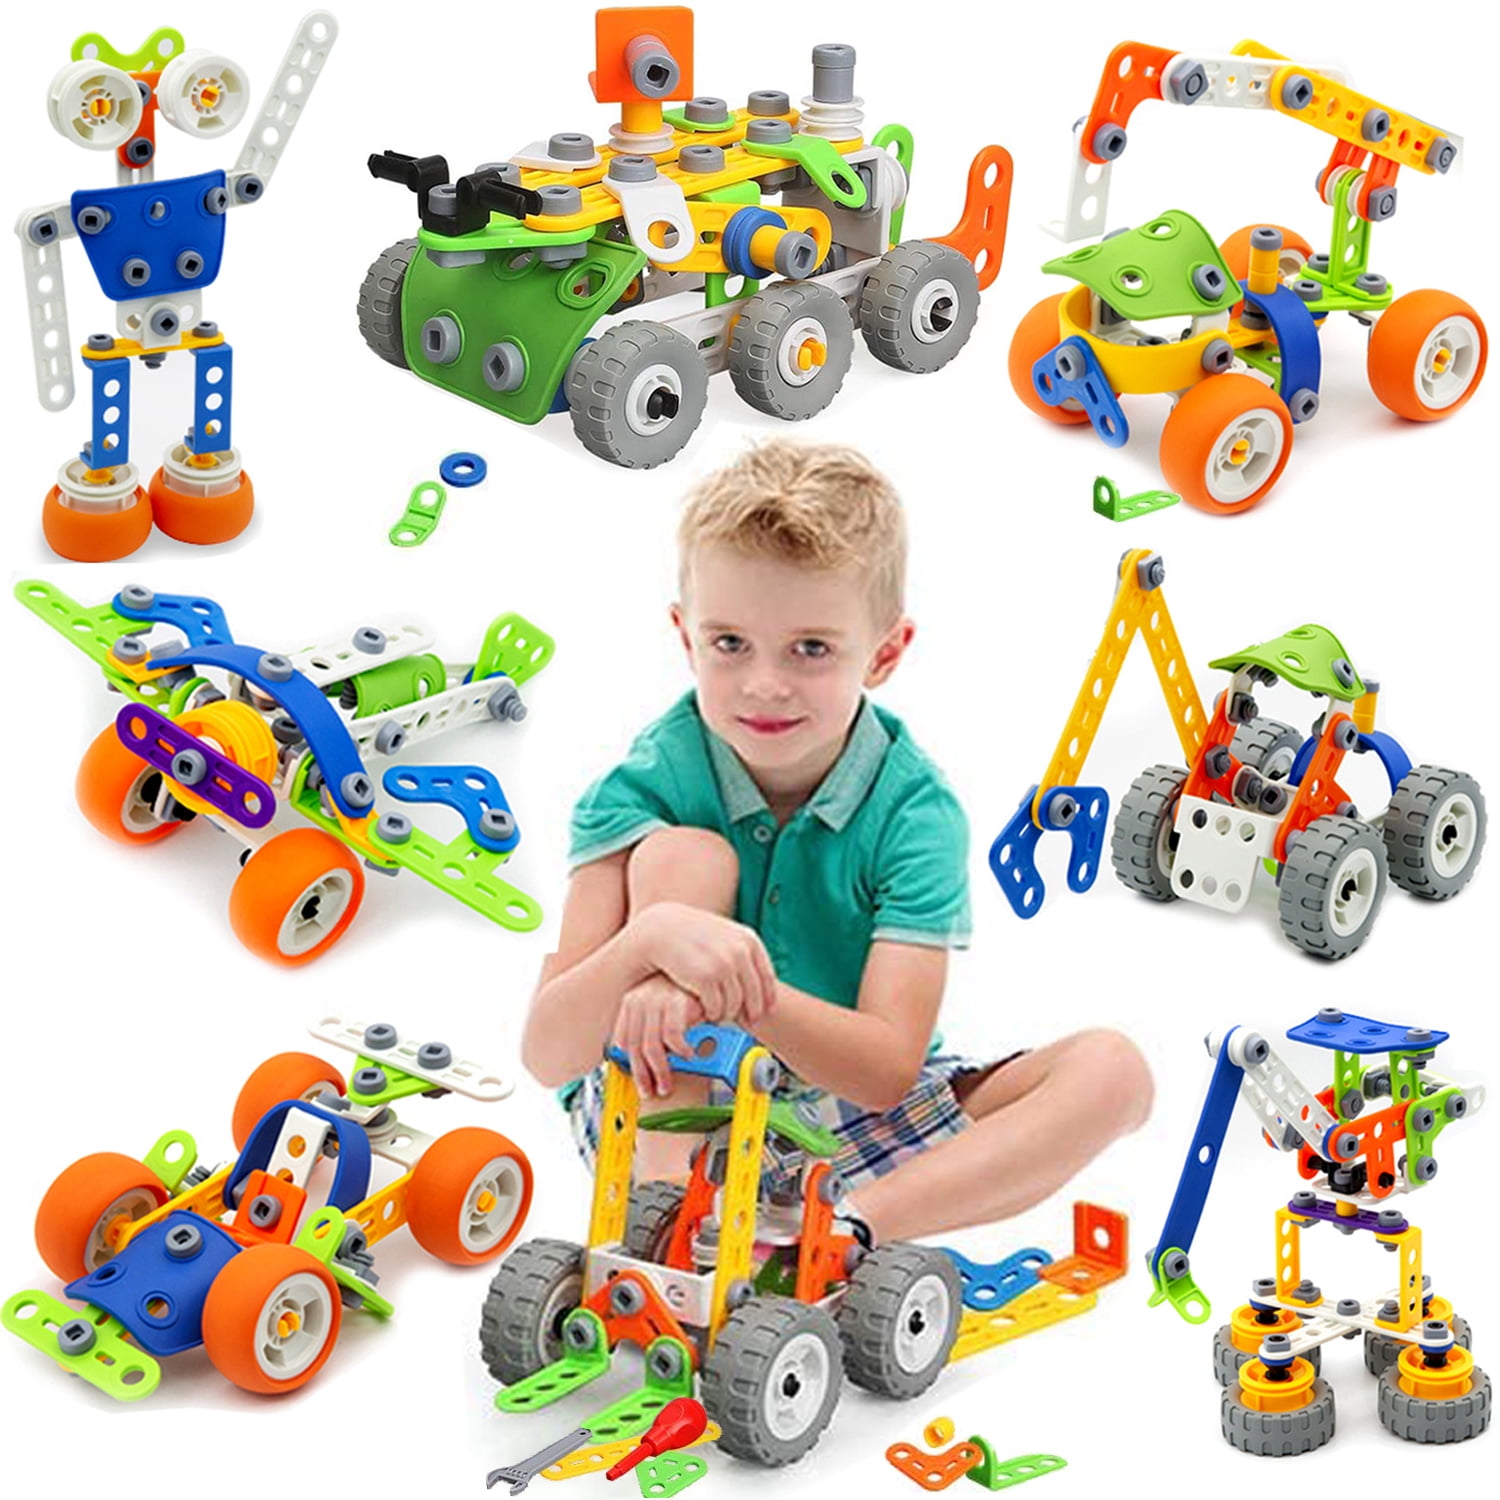 Kids Building STEM Toys, 125 Pcs Building Blocks Kit Educational  Construction Engineering Learning Set for Ages 3 4 5 6 7 8 9 10 Year Old  Boys Girls